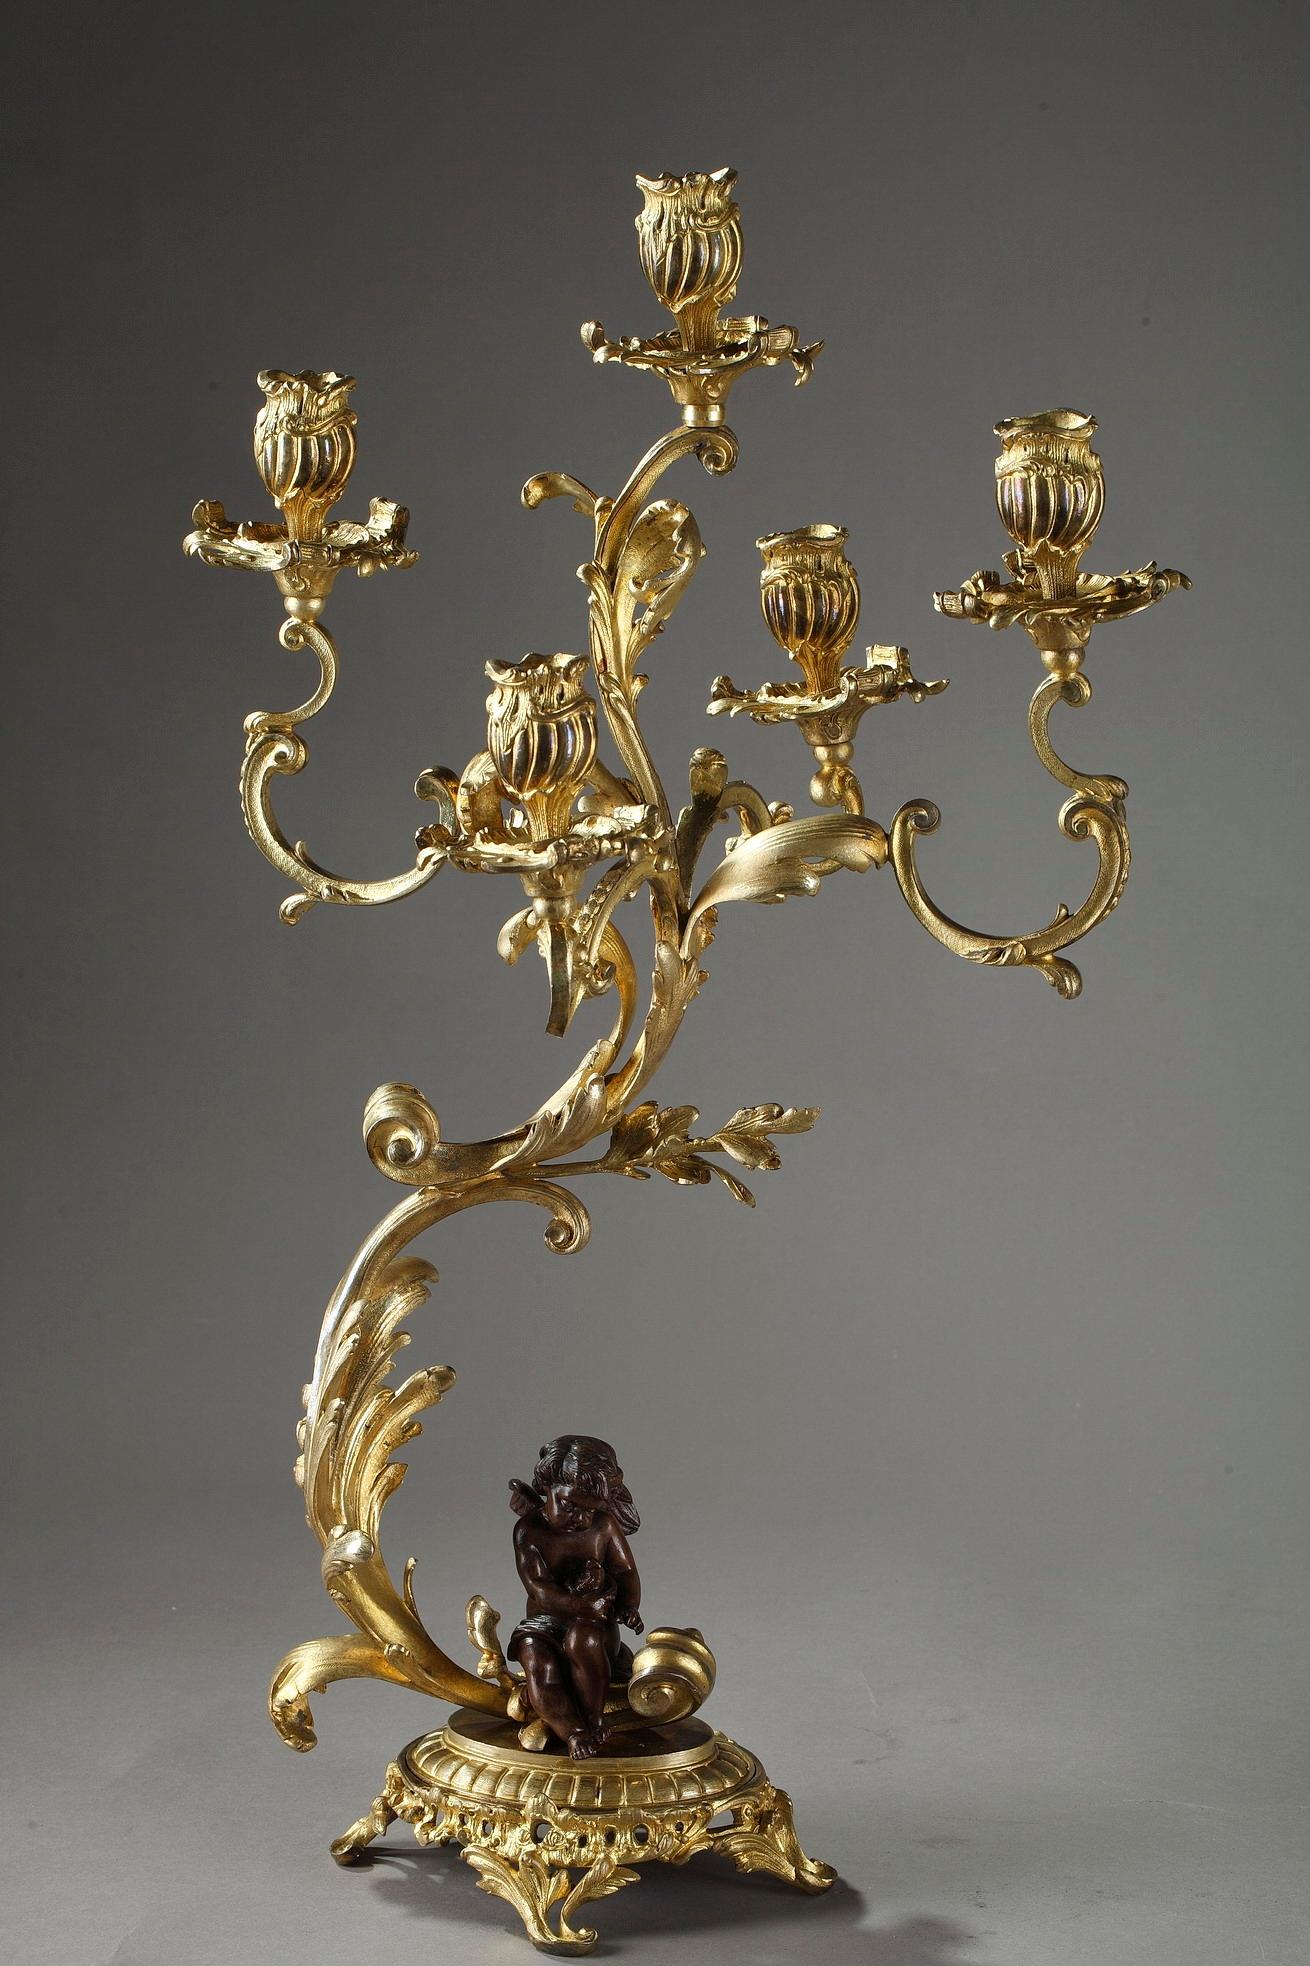 A set of gilt and patinated bronze candelabra lamps, each with five branches intricately decorated with rinceau and scrolling foliages. Influenced by Louis XV style, with its flowing lines and graceful form that are rendered in sumptuous detail.